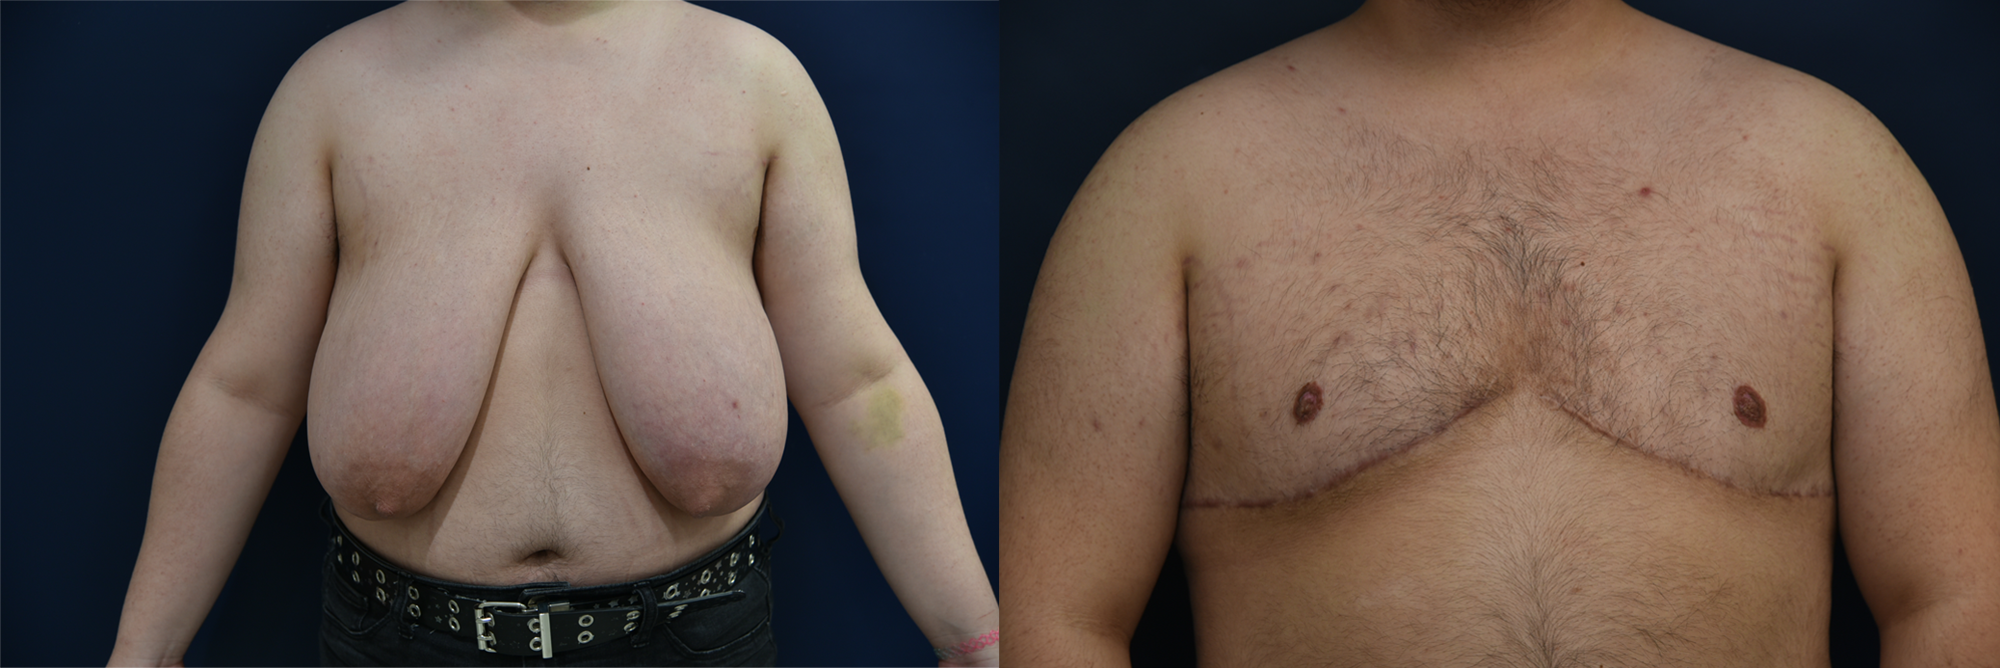 Female to Male Top Surgery Before and After Photo by Dr. Leveque of Gulf Coast Plastic Surgery in Pensacola, FL